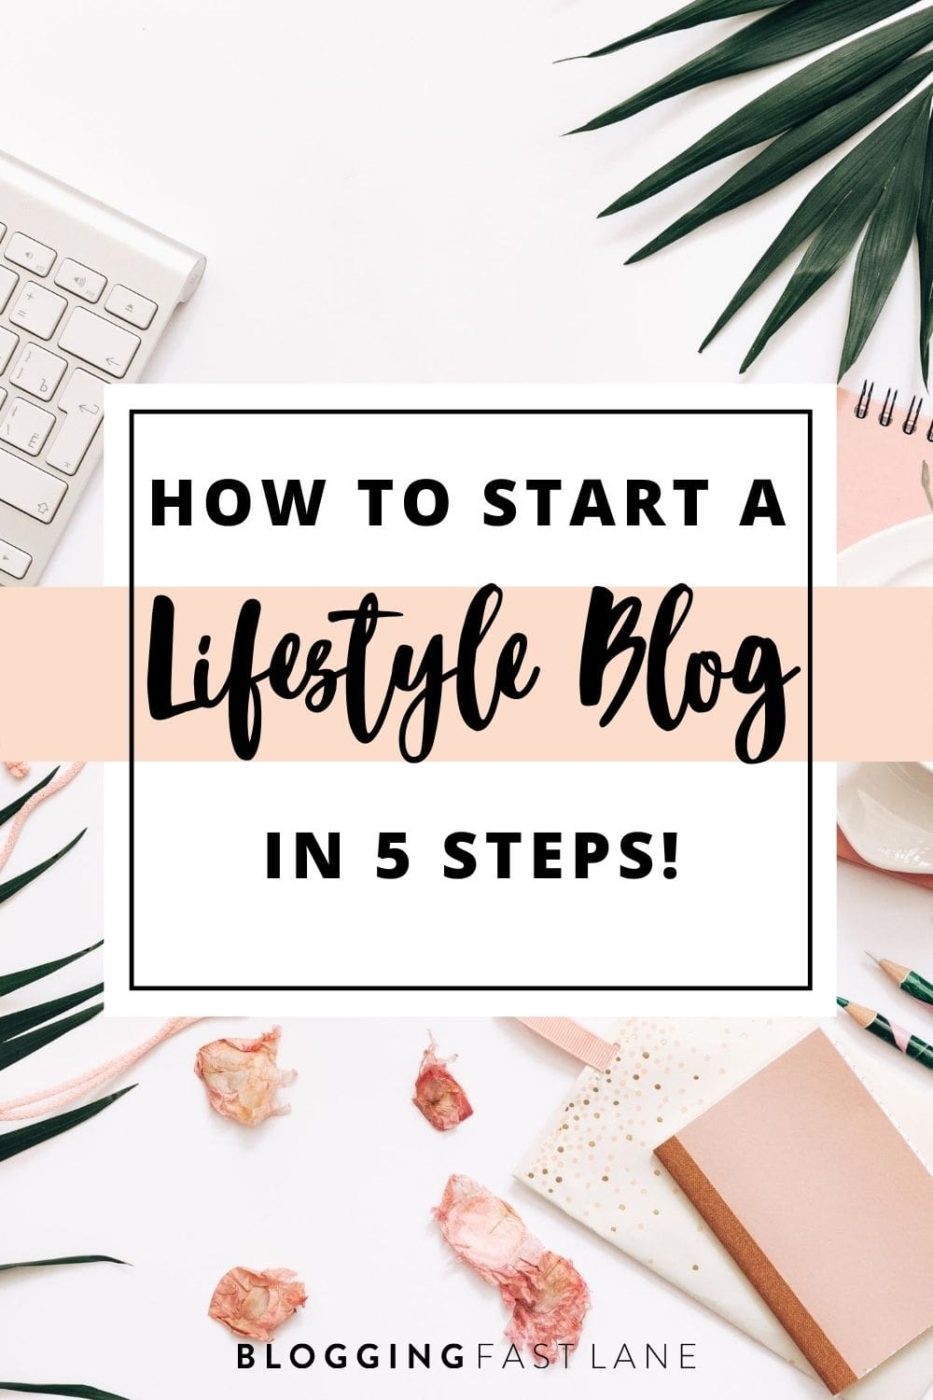 How to Start a Lifestyle Blog | If you're hoping to start a lifestyle blog, you're in the right place. Click here to check out our 5 step guide on how to start a lifestyle blog!